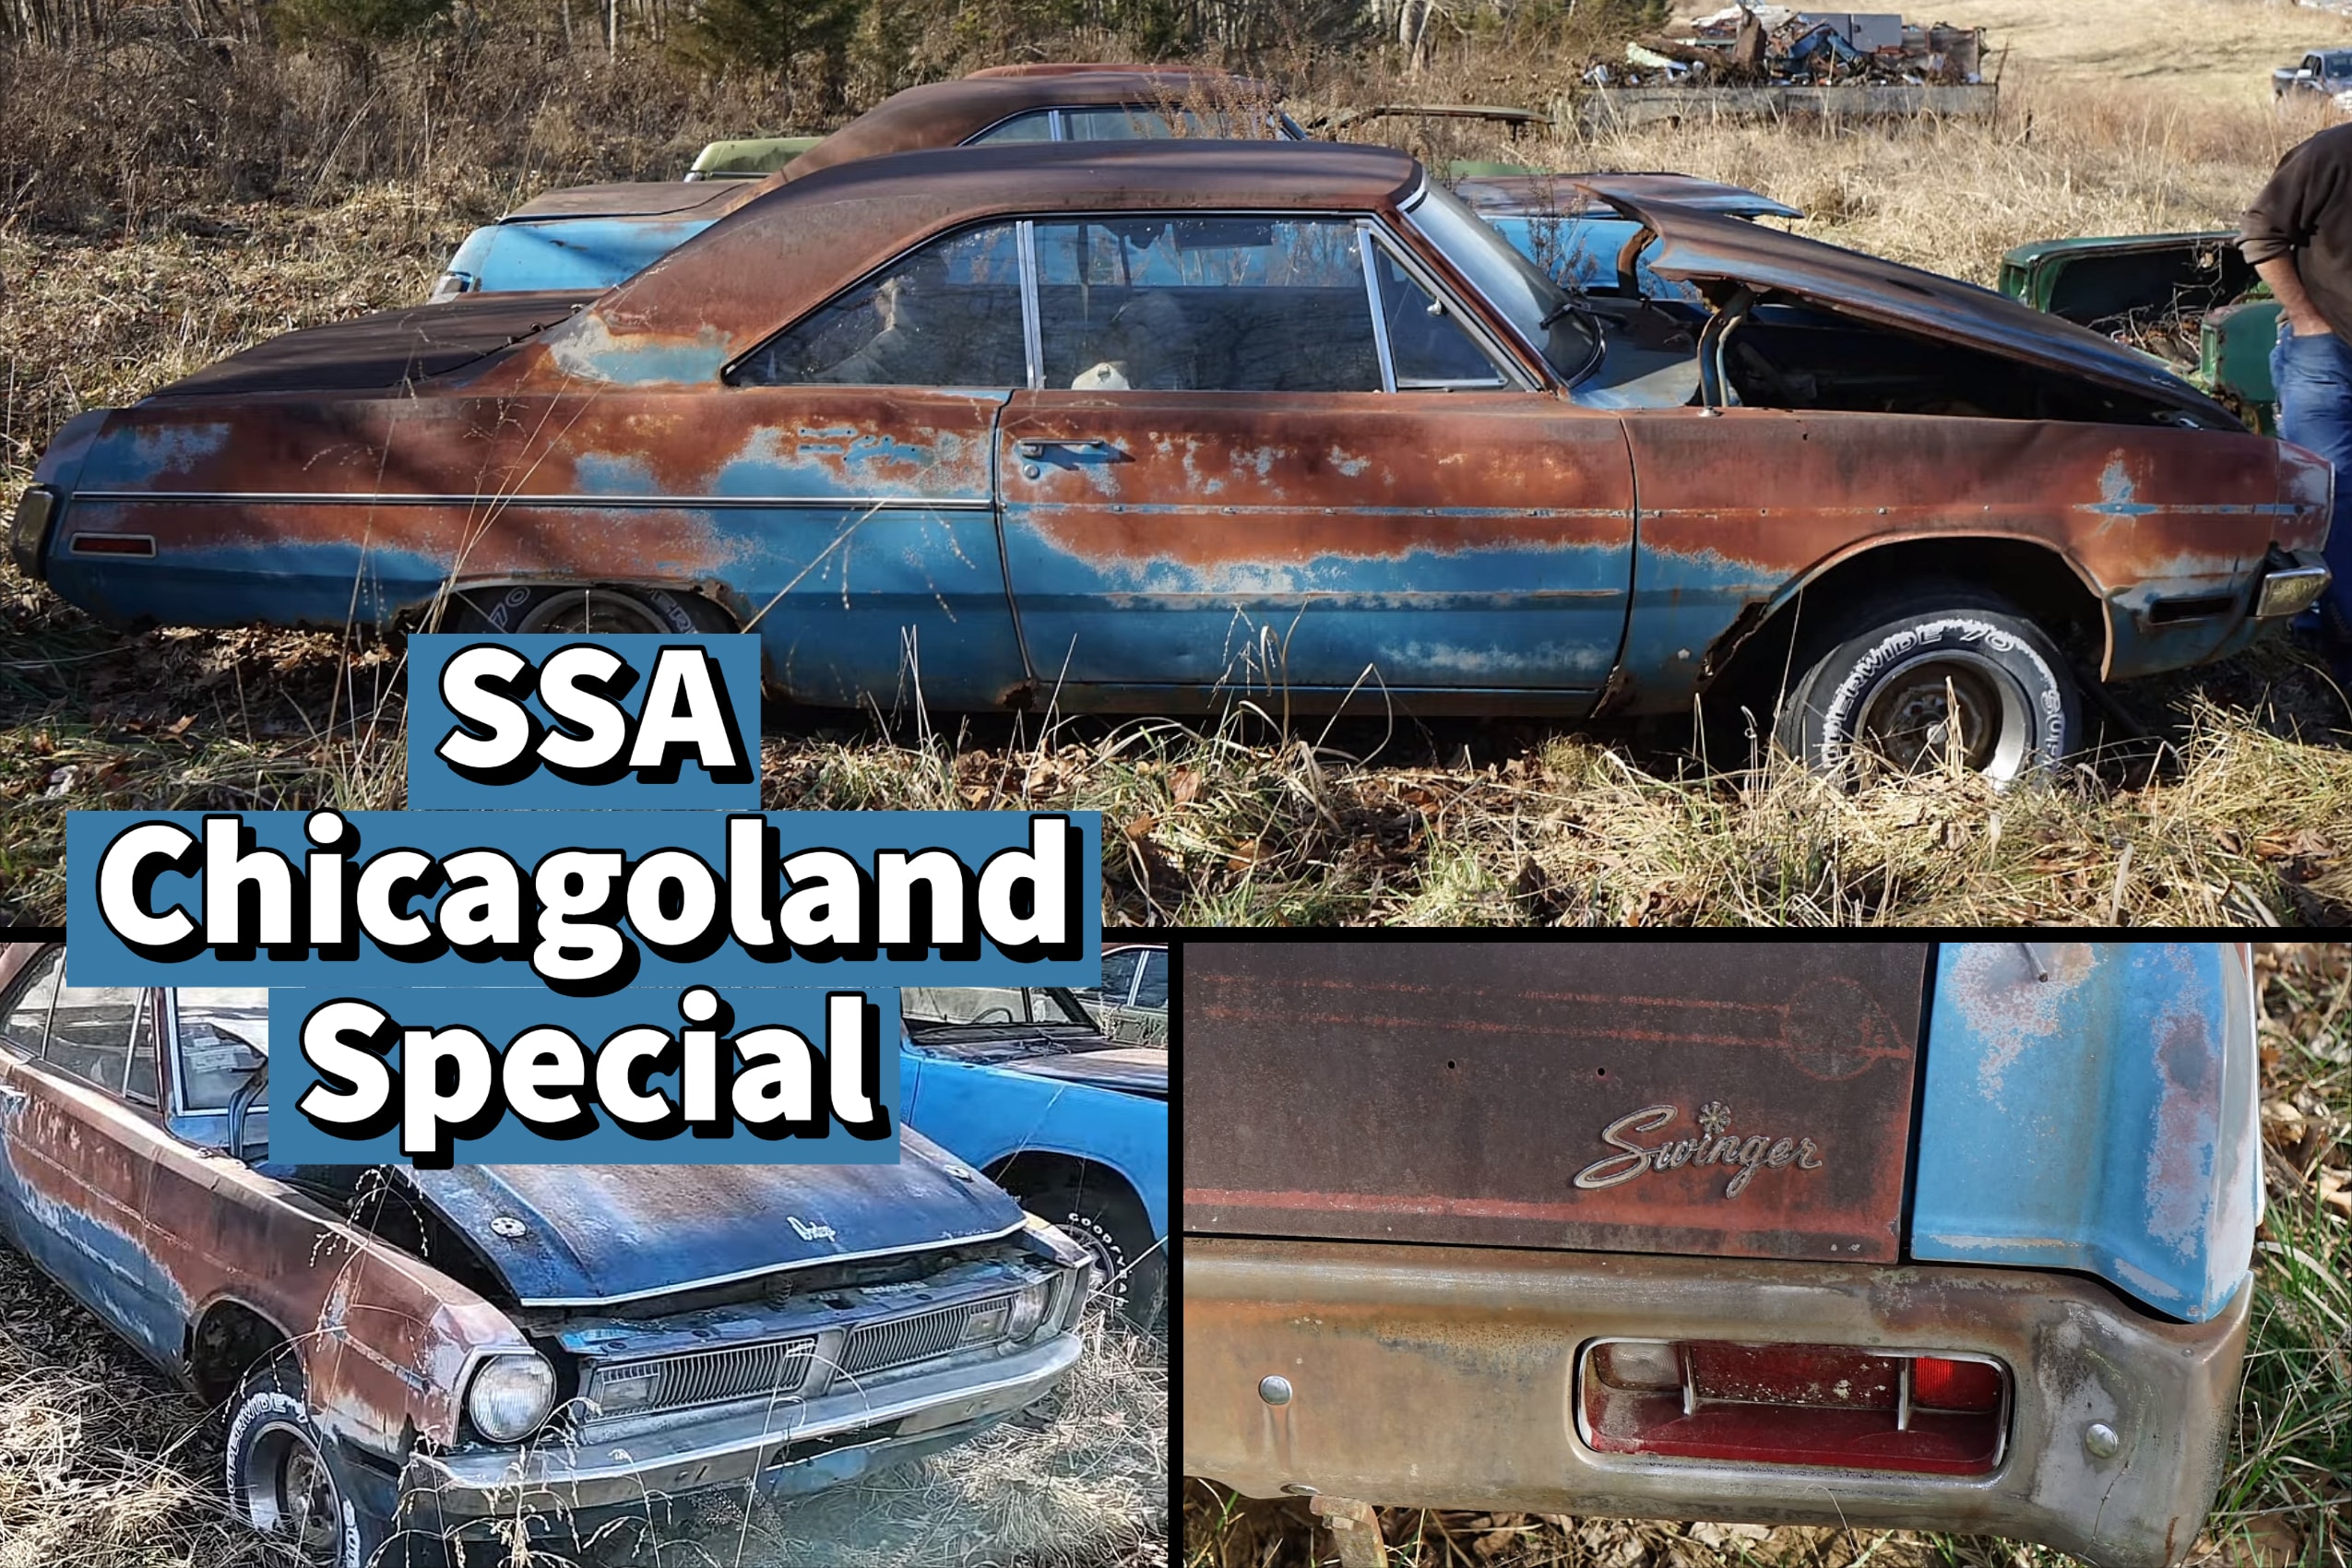 Worlds Rarest 1970 Dodge Dart Is a Super Swinger Automatic Rotting Away in a Backyard